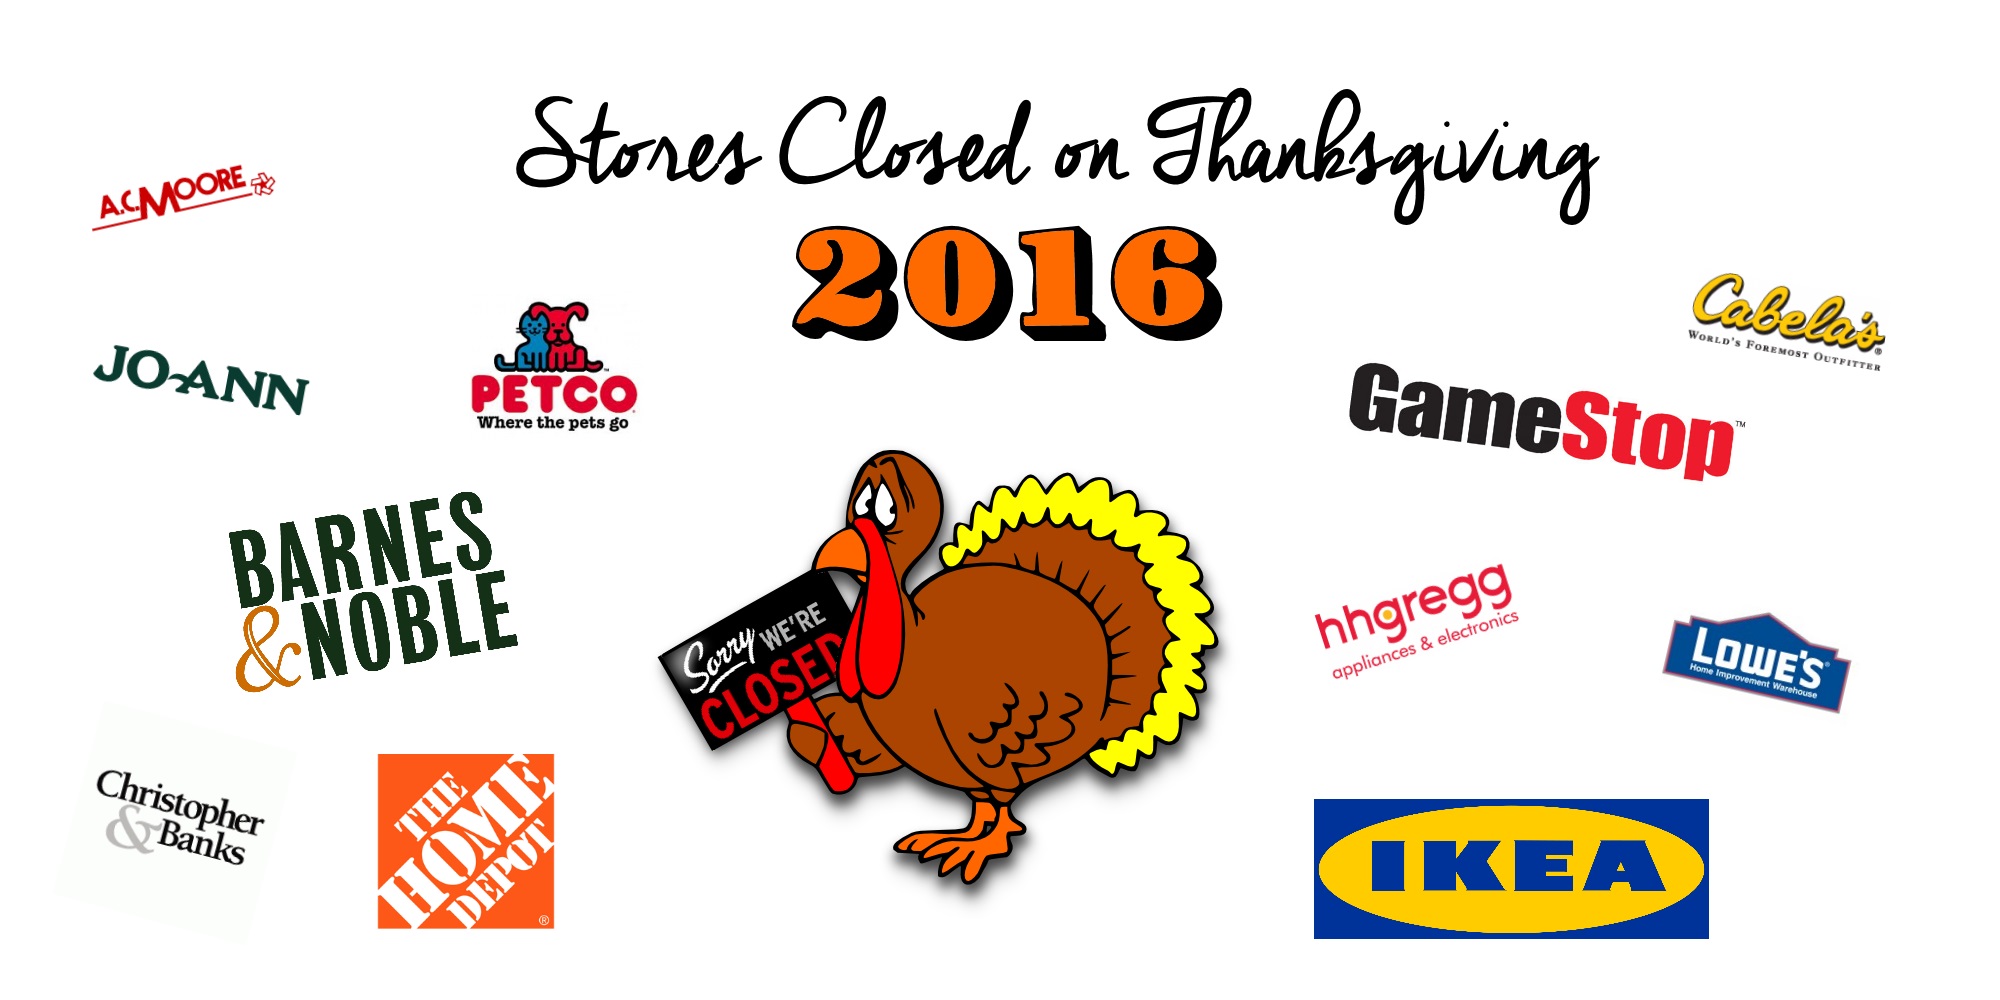 Which Stores Will Be Closed on Thanksgiving 2016?